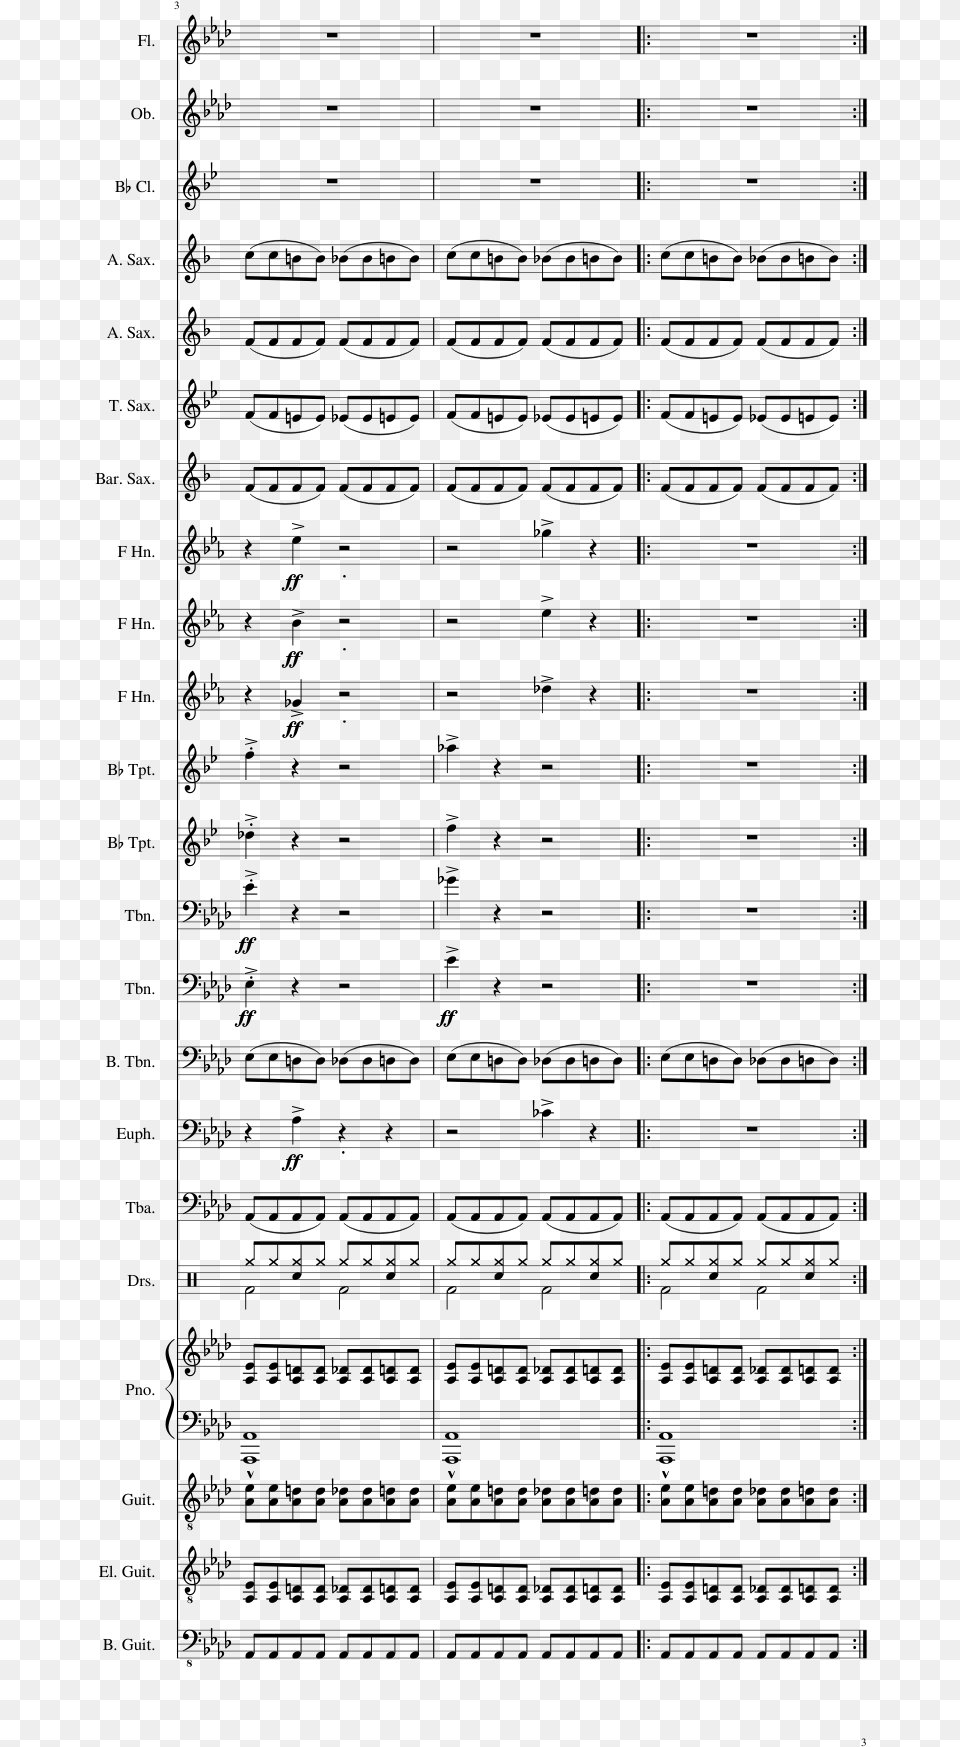 The 1966 Batman Theme Sheet Music Composed By Neal, Gray Free Transparent Png